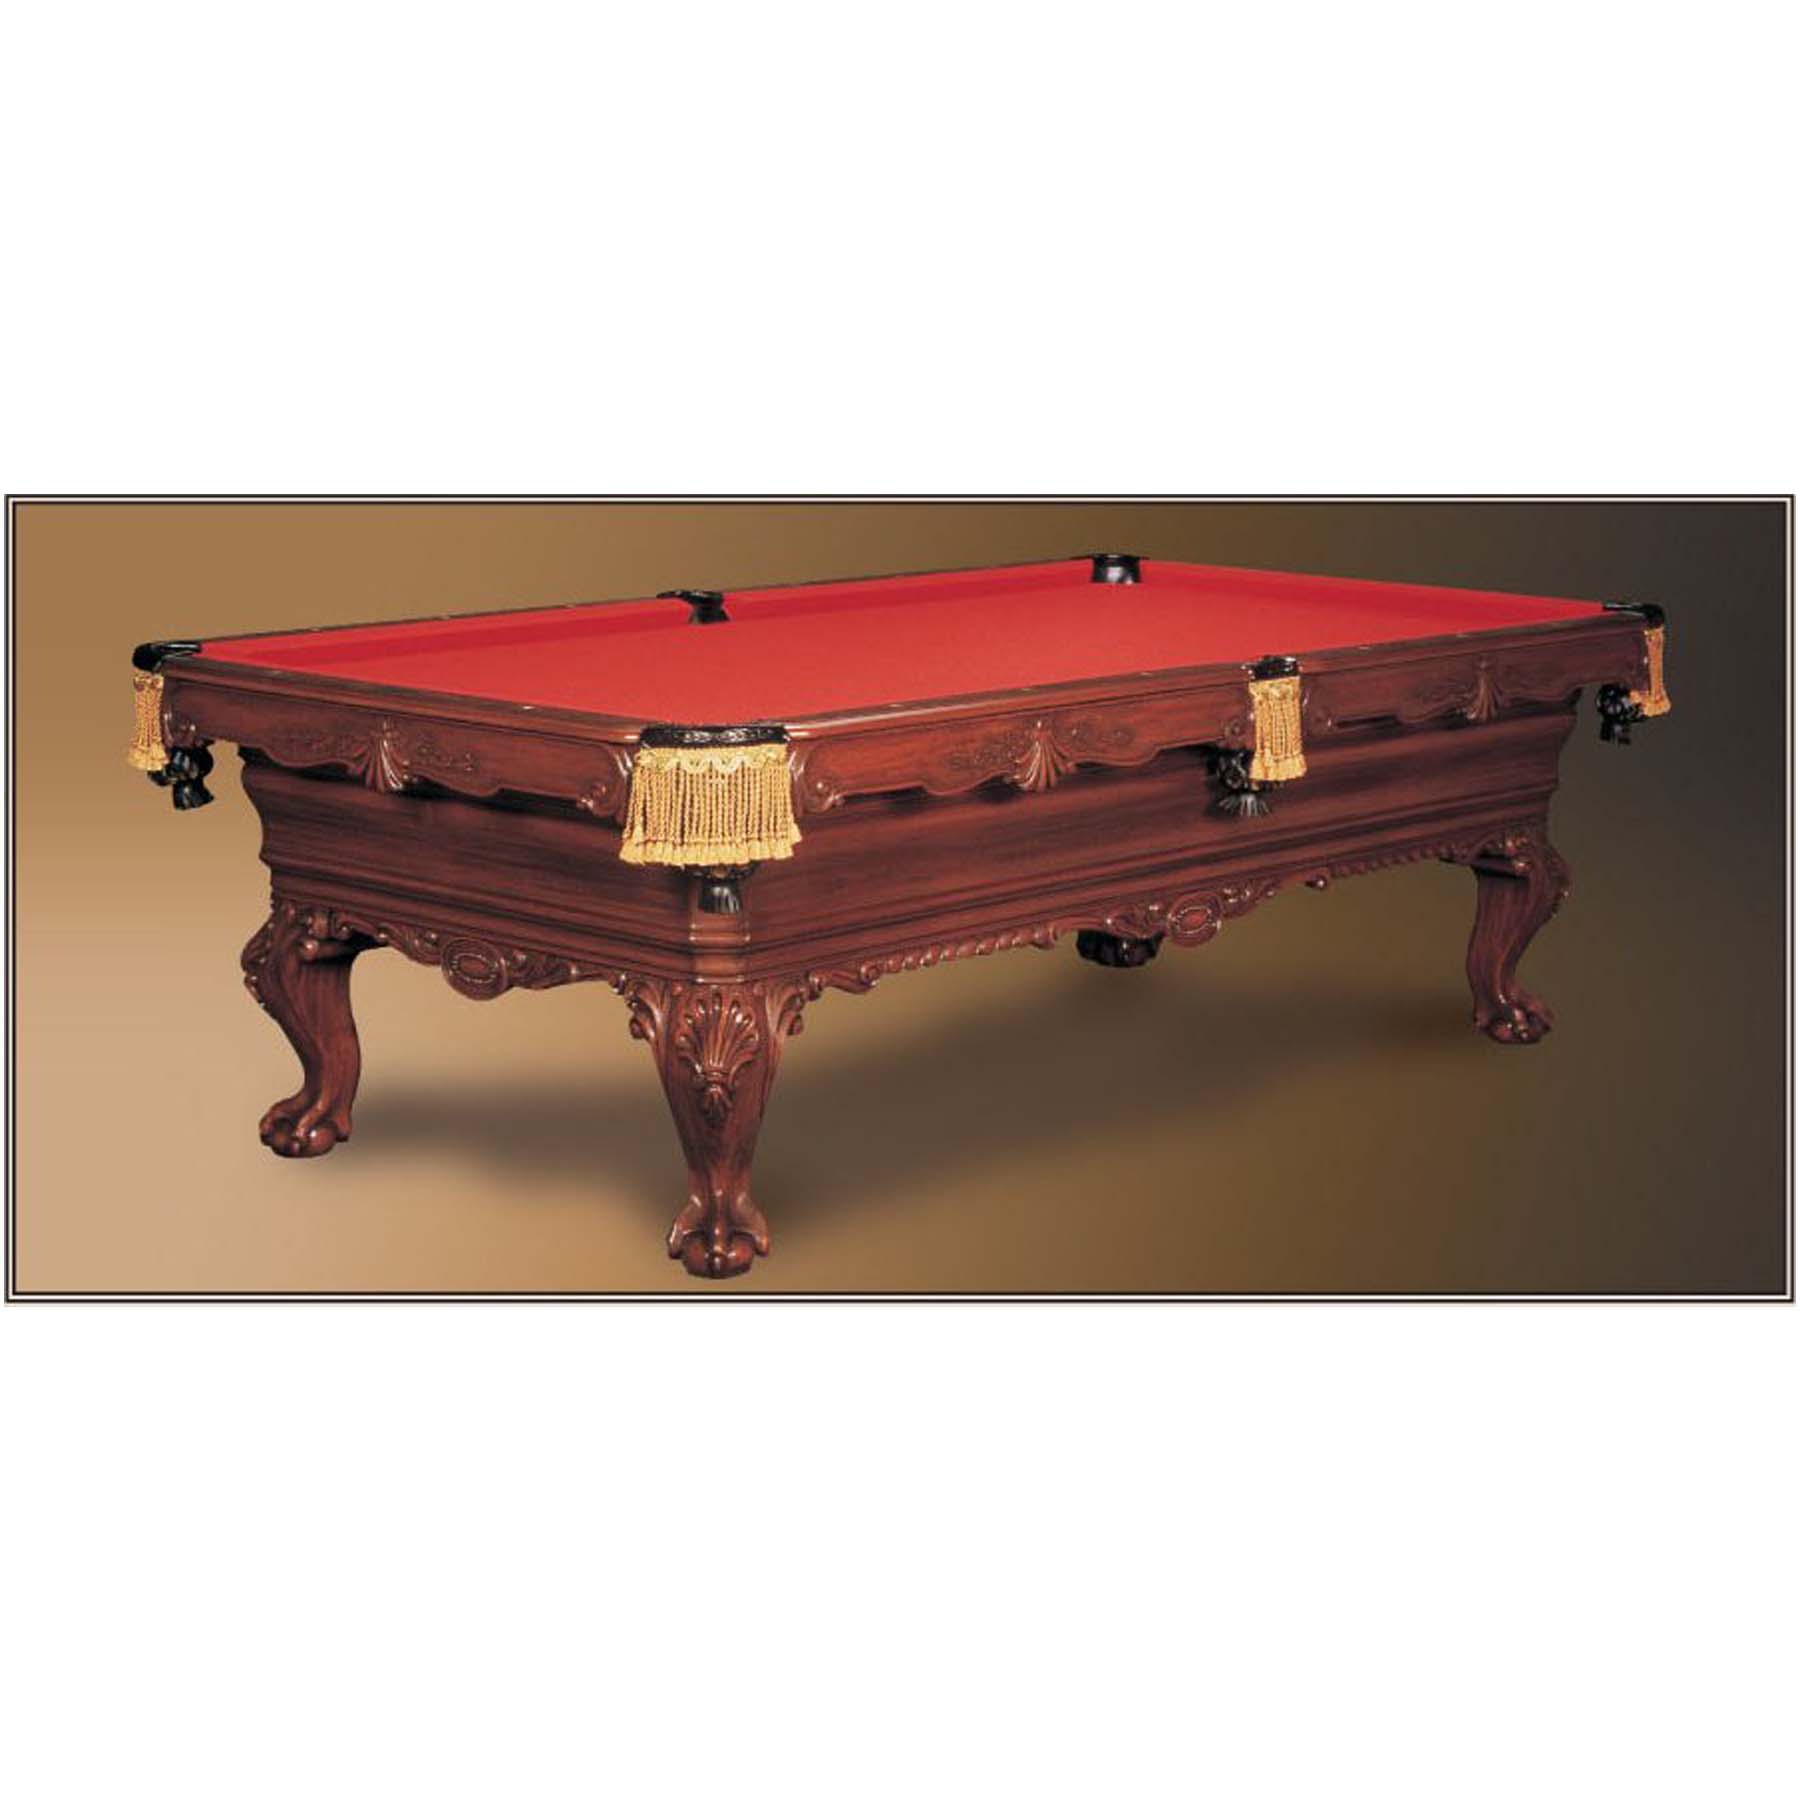 Allenton 8' Pool Table with Ball & Claw Leg